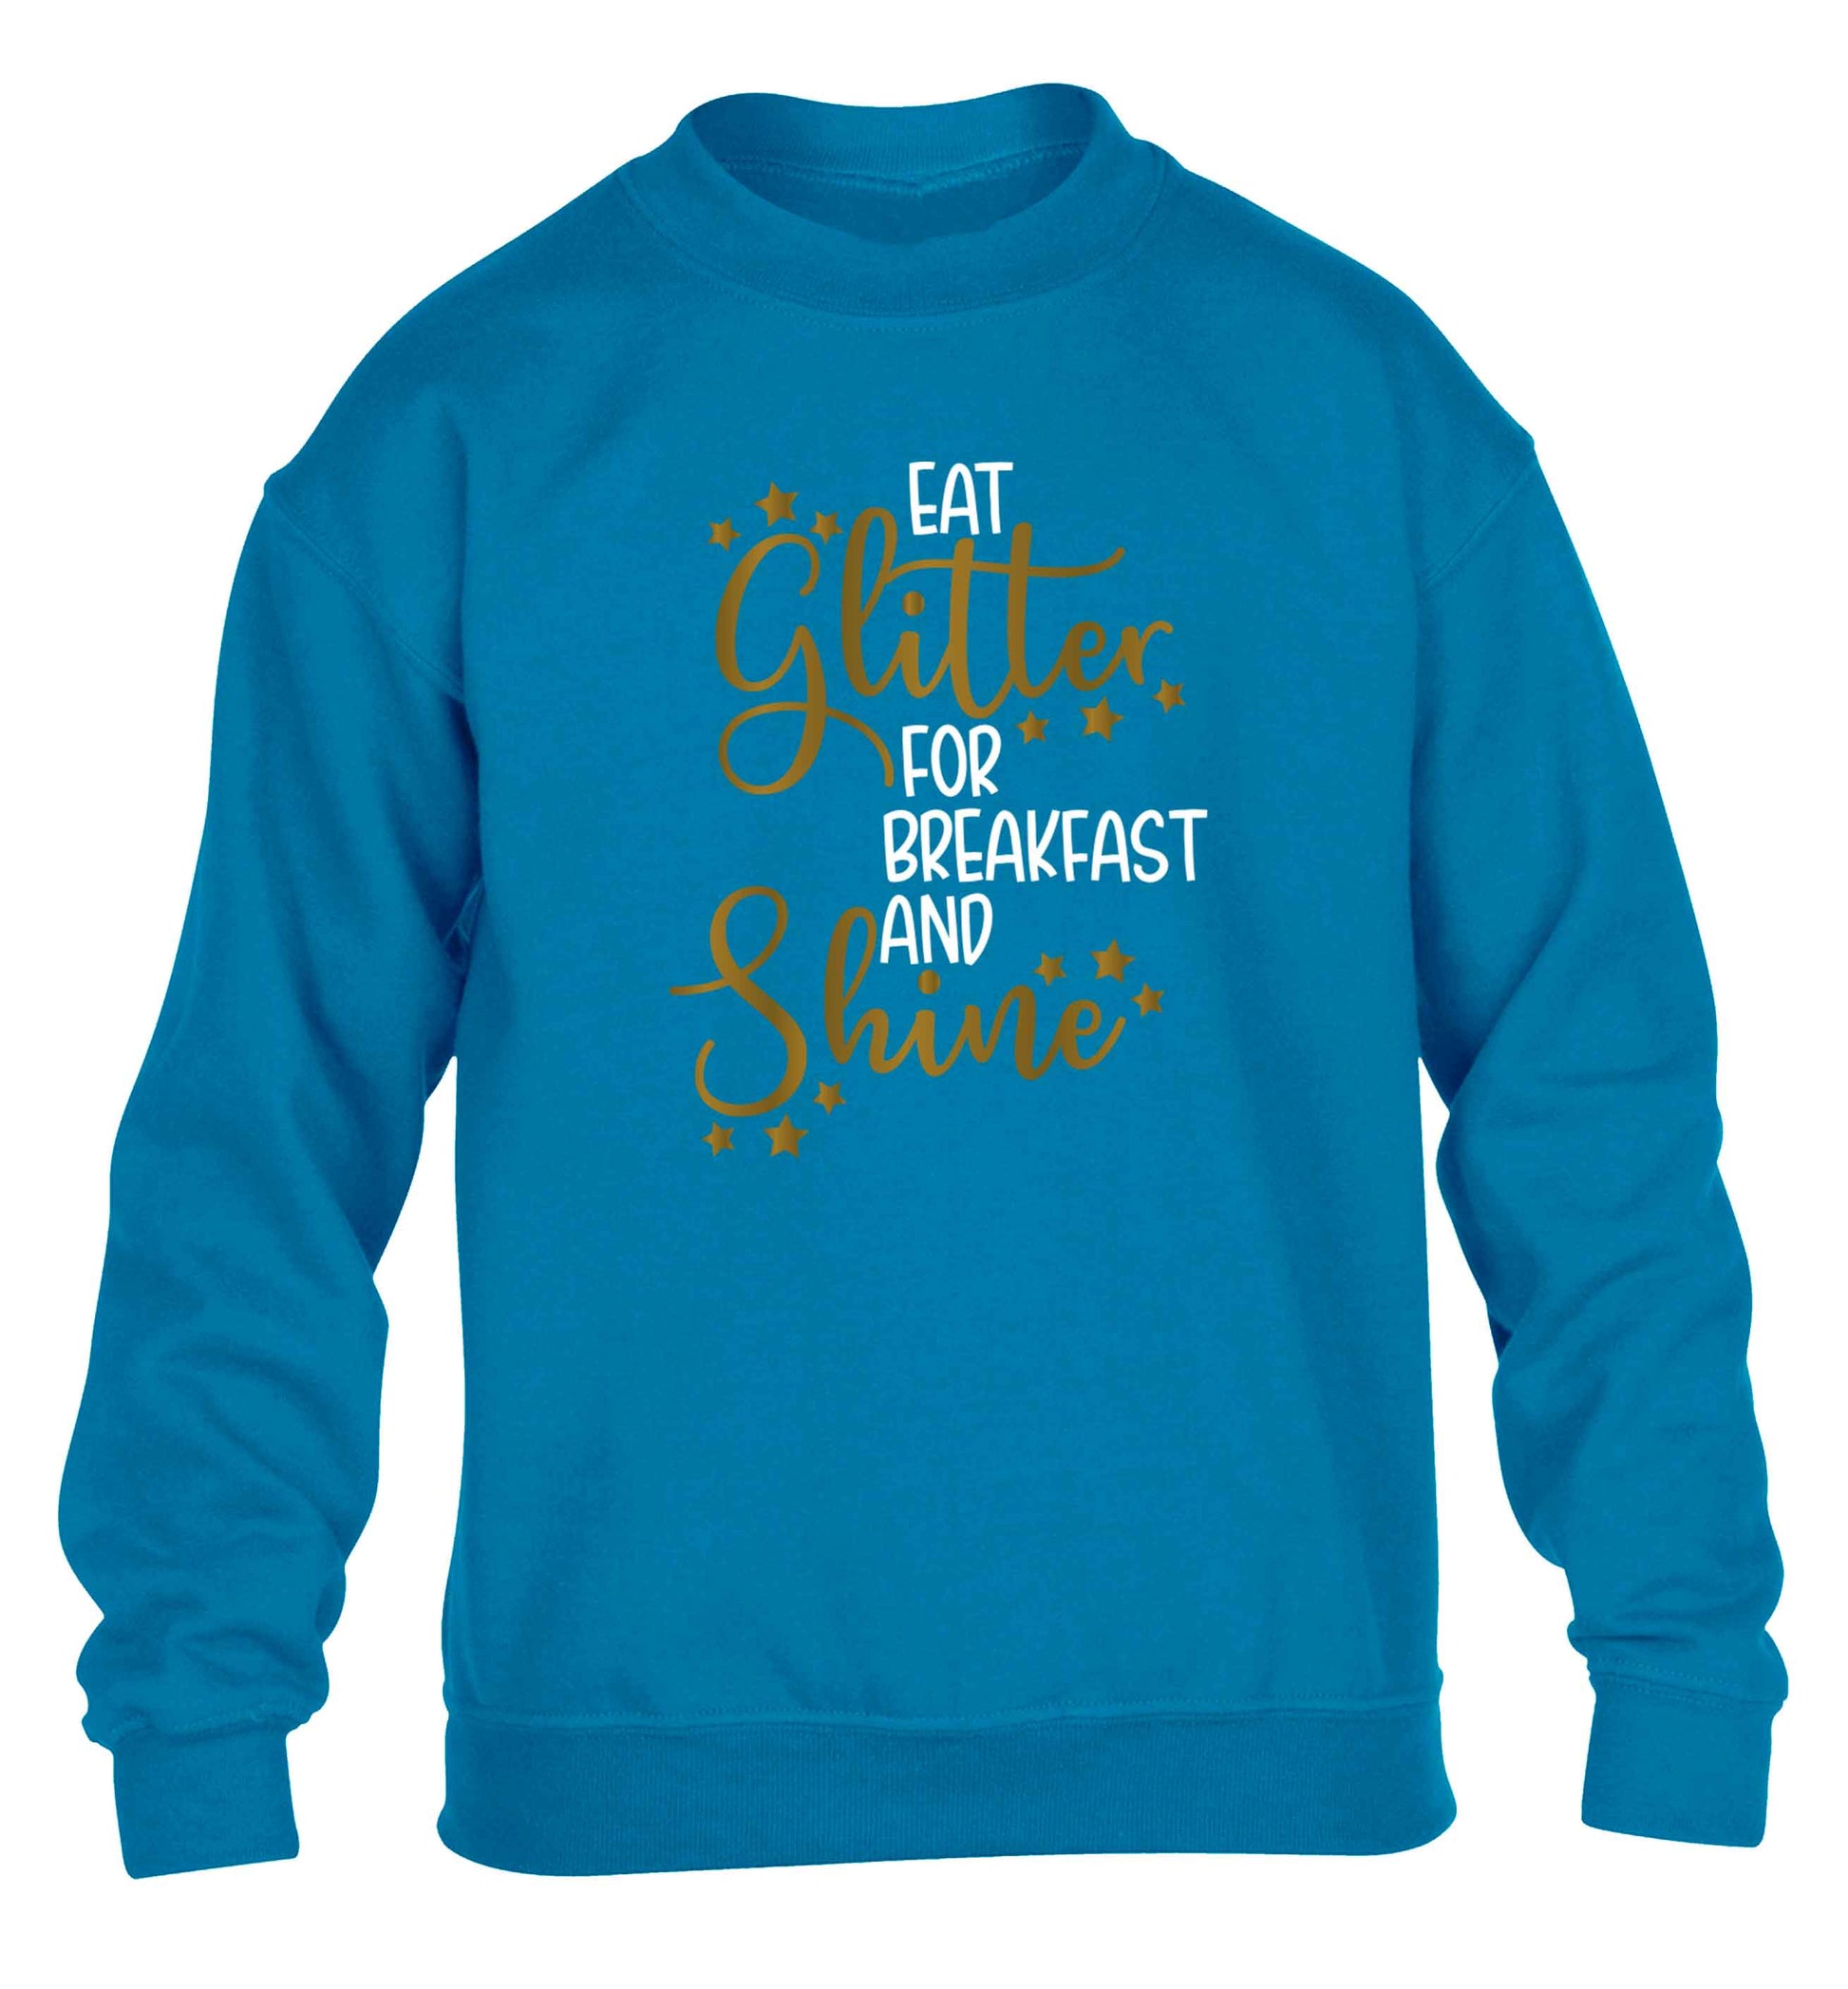 Eat glitter for breakfast and shine all day children's blue sweater 12-13 Years